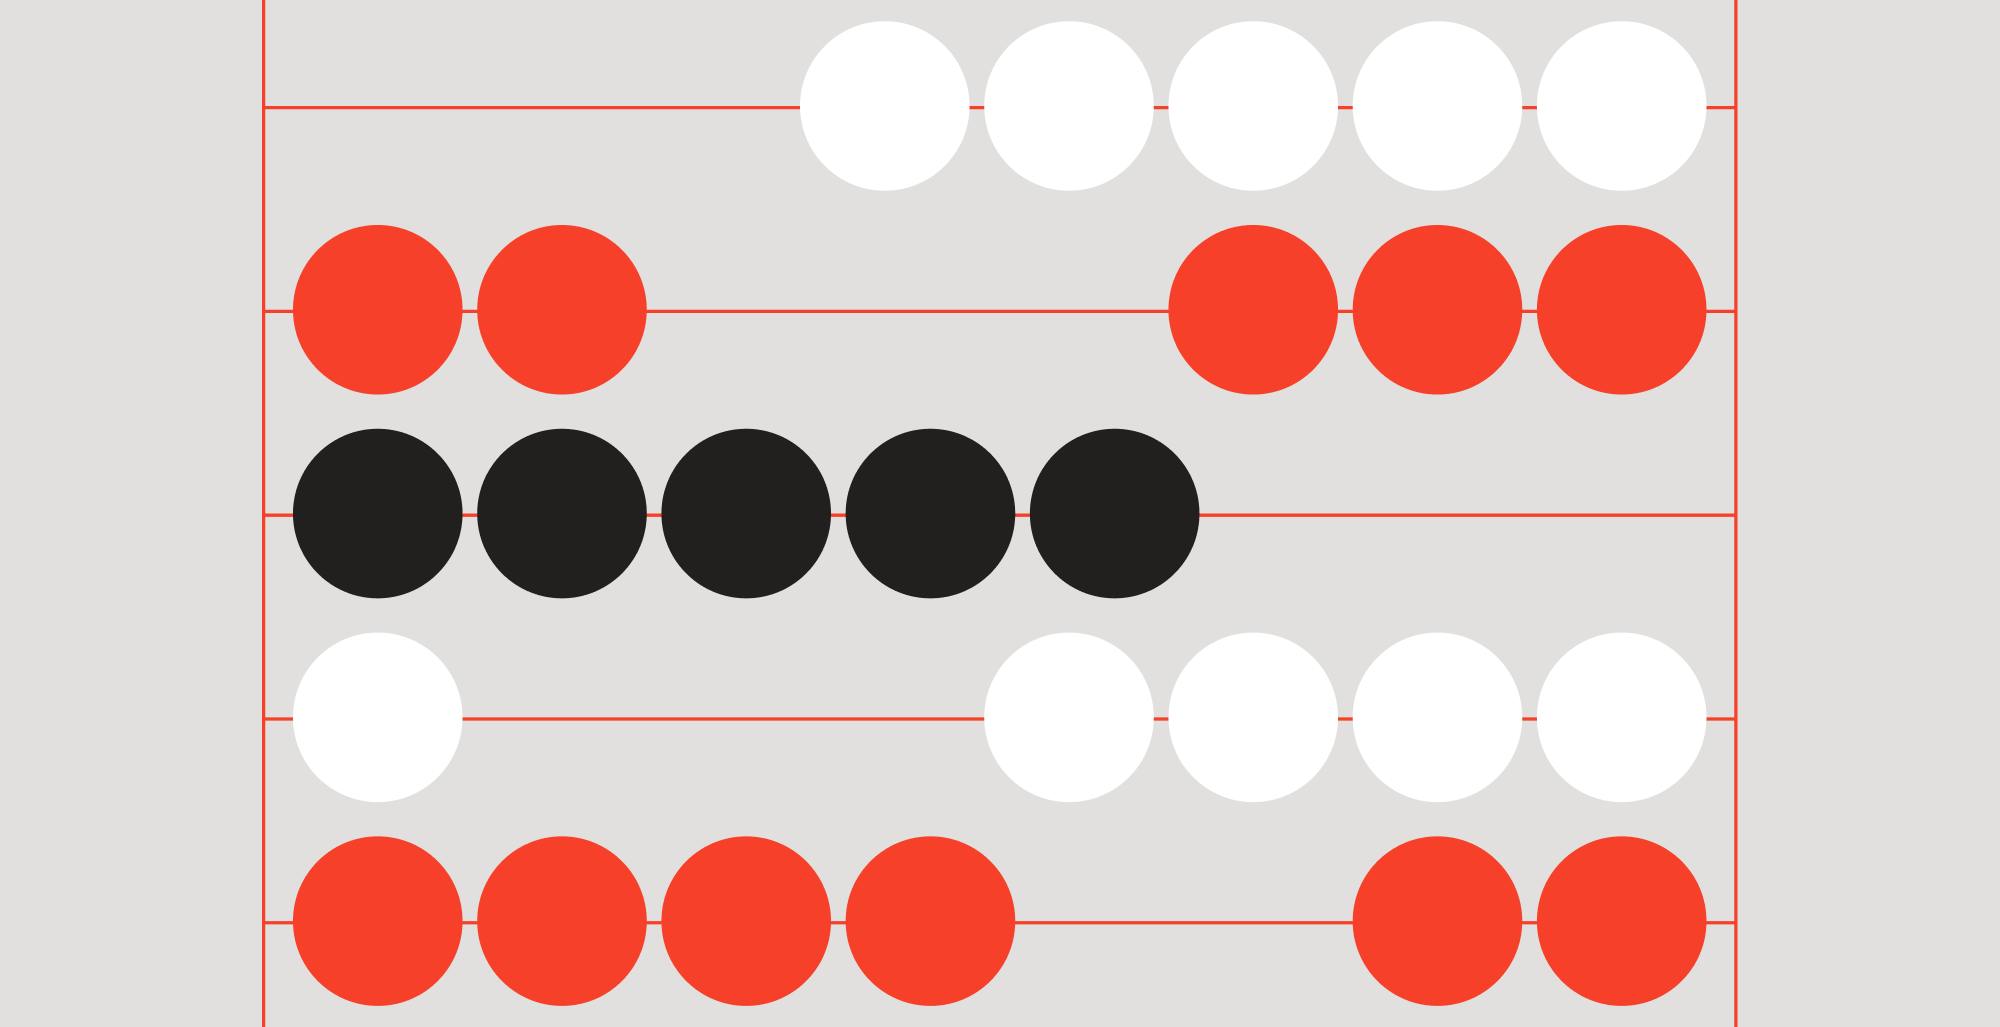 A vector representation of an abacus with white, red, and black beads.